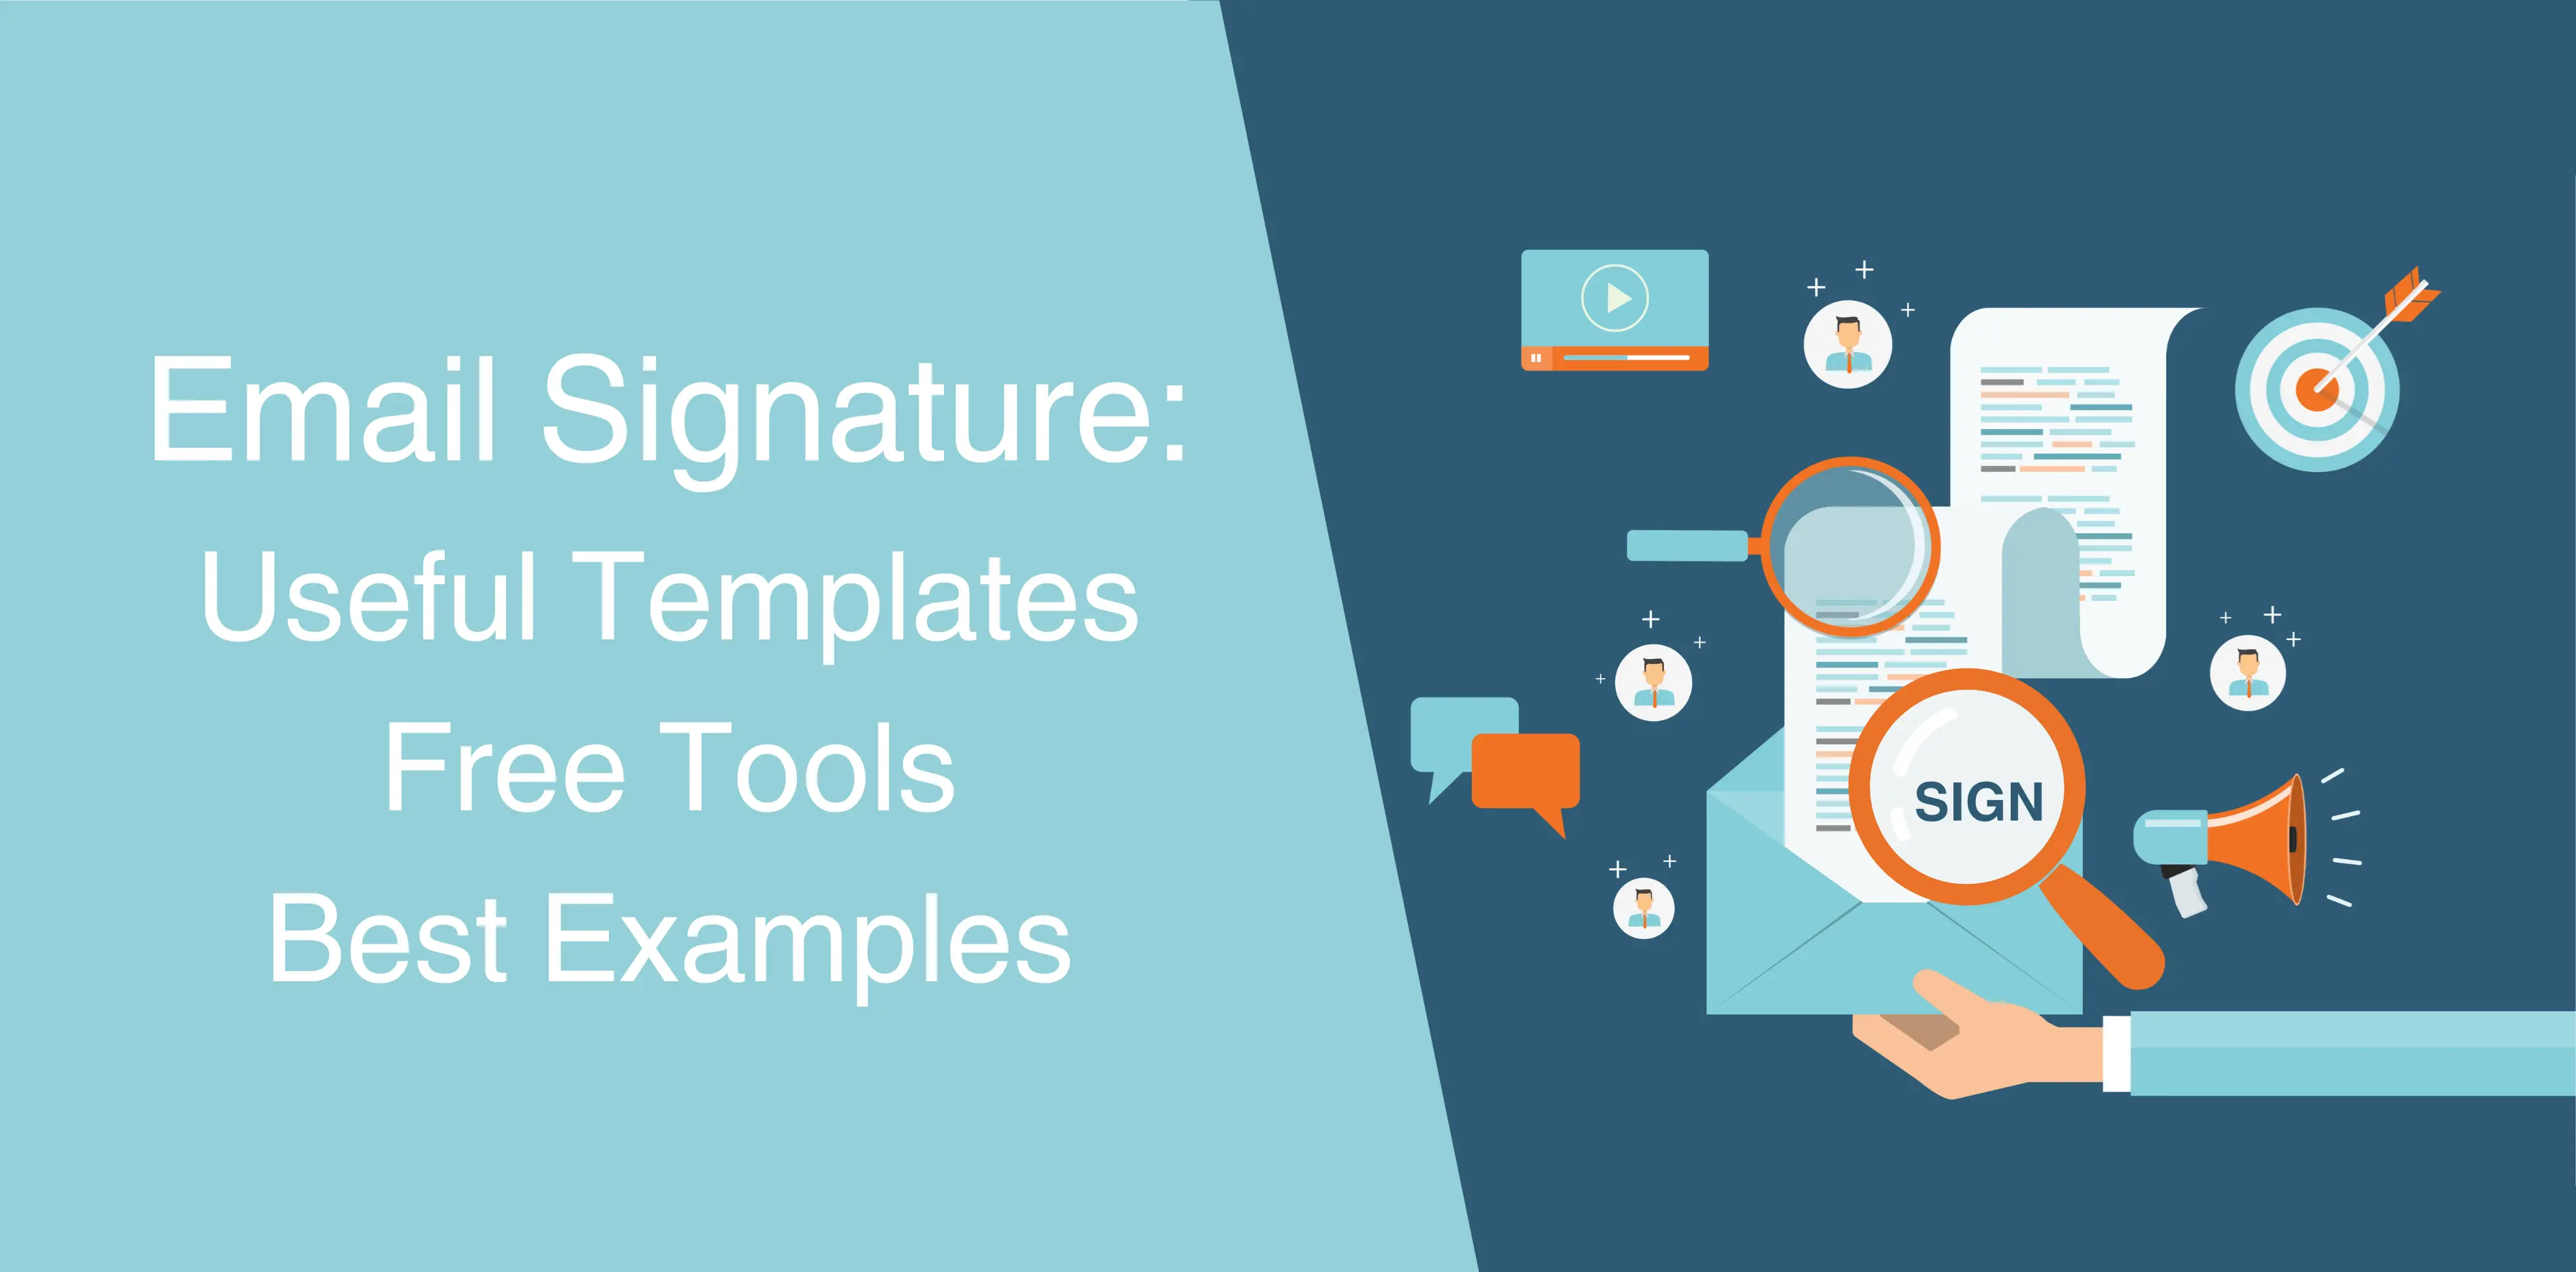 Email Signature: Useful Templates, Free Tools, and Best Examples